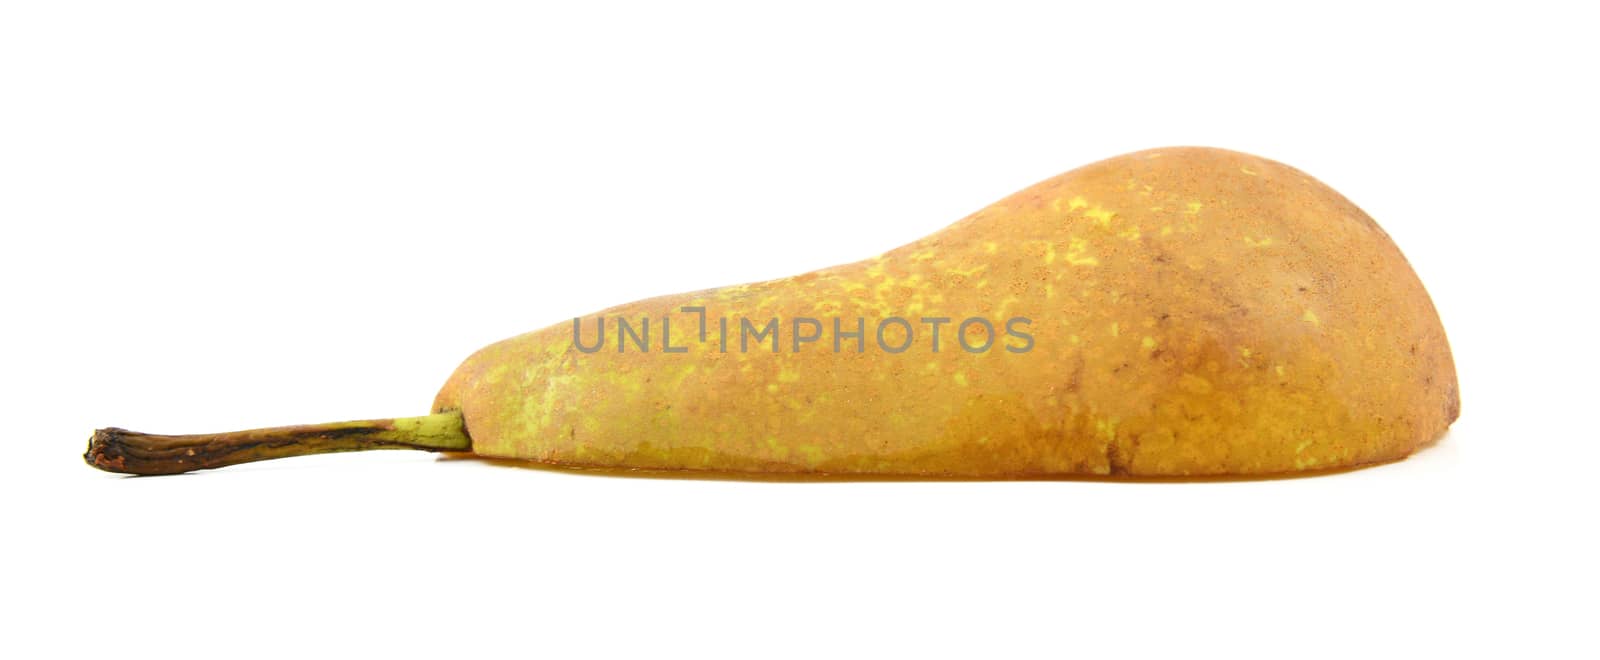 Half a Conference pear, lying flat, isolated on a white background